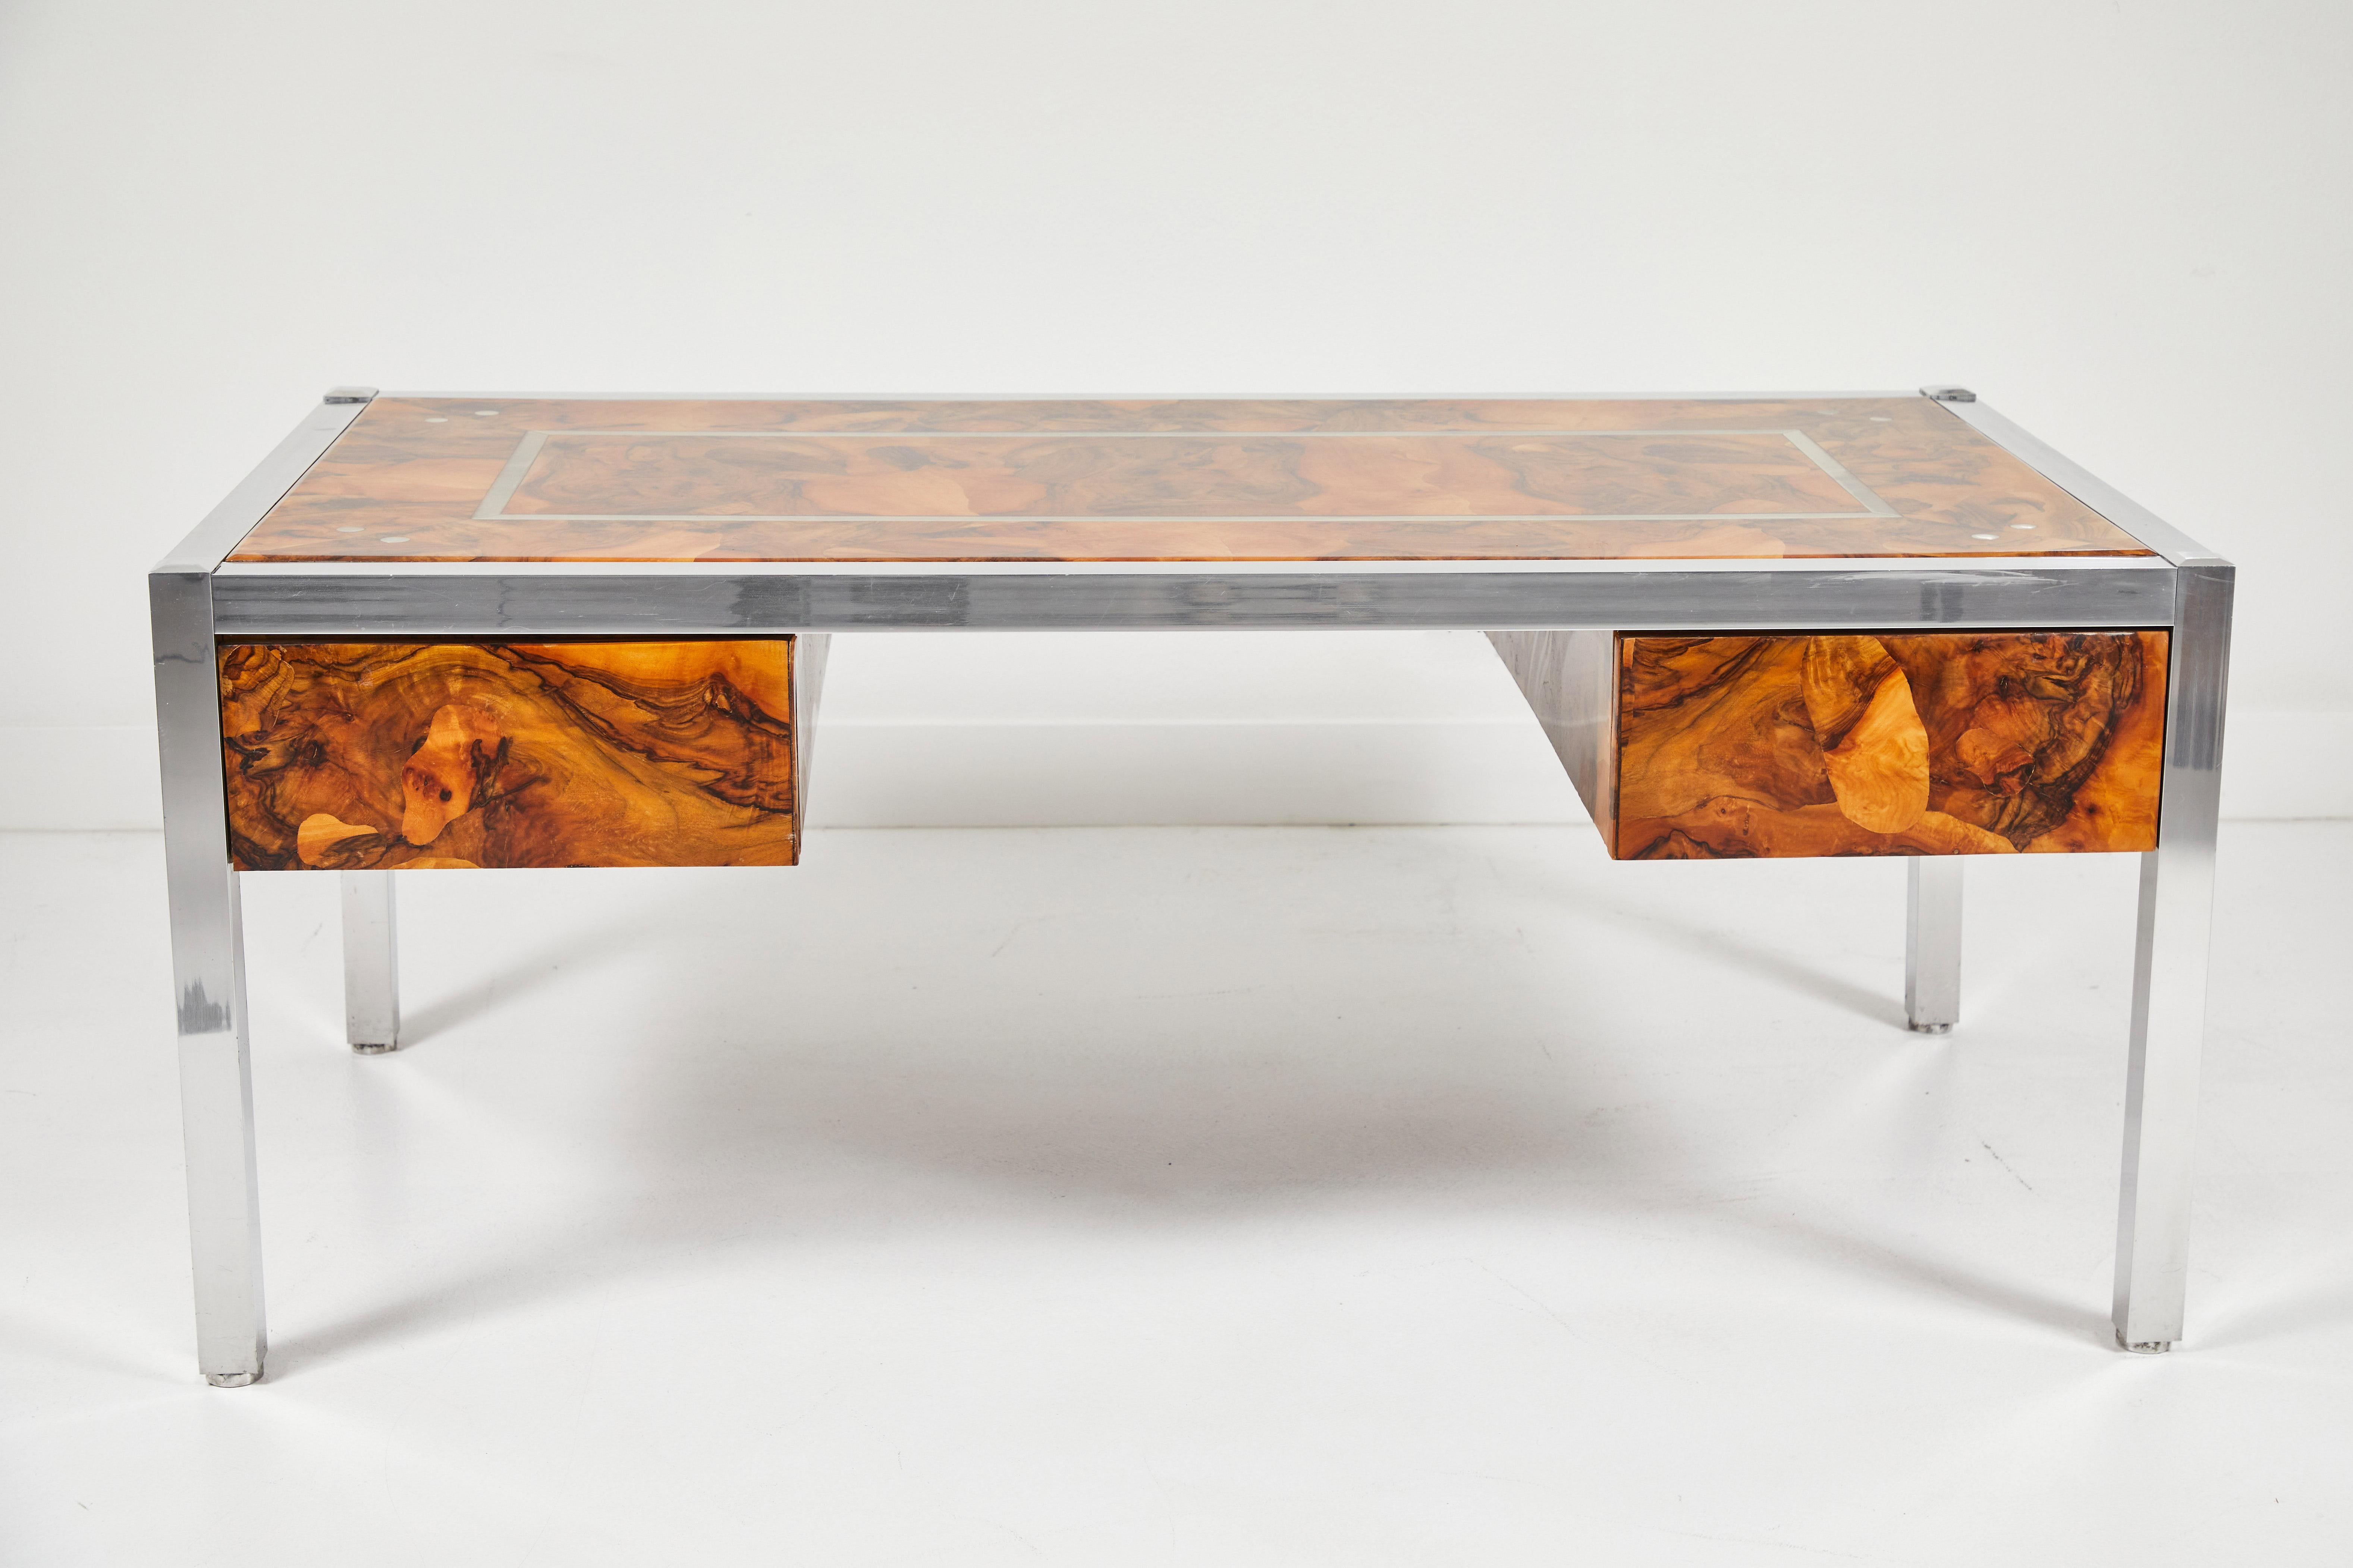 A striking olive burl desk with aluminum legs and accents. A layer of resin encapsulates the desk revealing the distinct patterns in the burl wood. The desk has 2 drawers, one on either side and rests on aluminum legs. A perfect accent for any